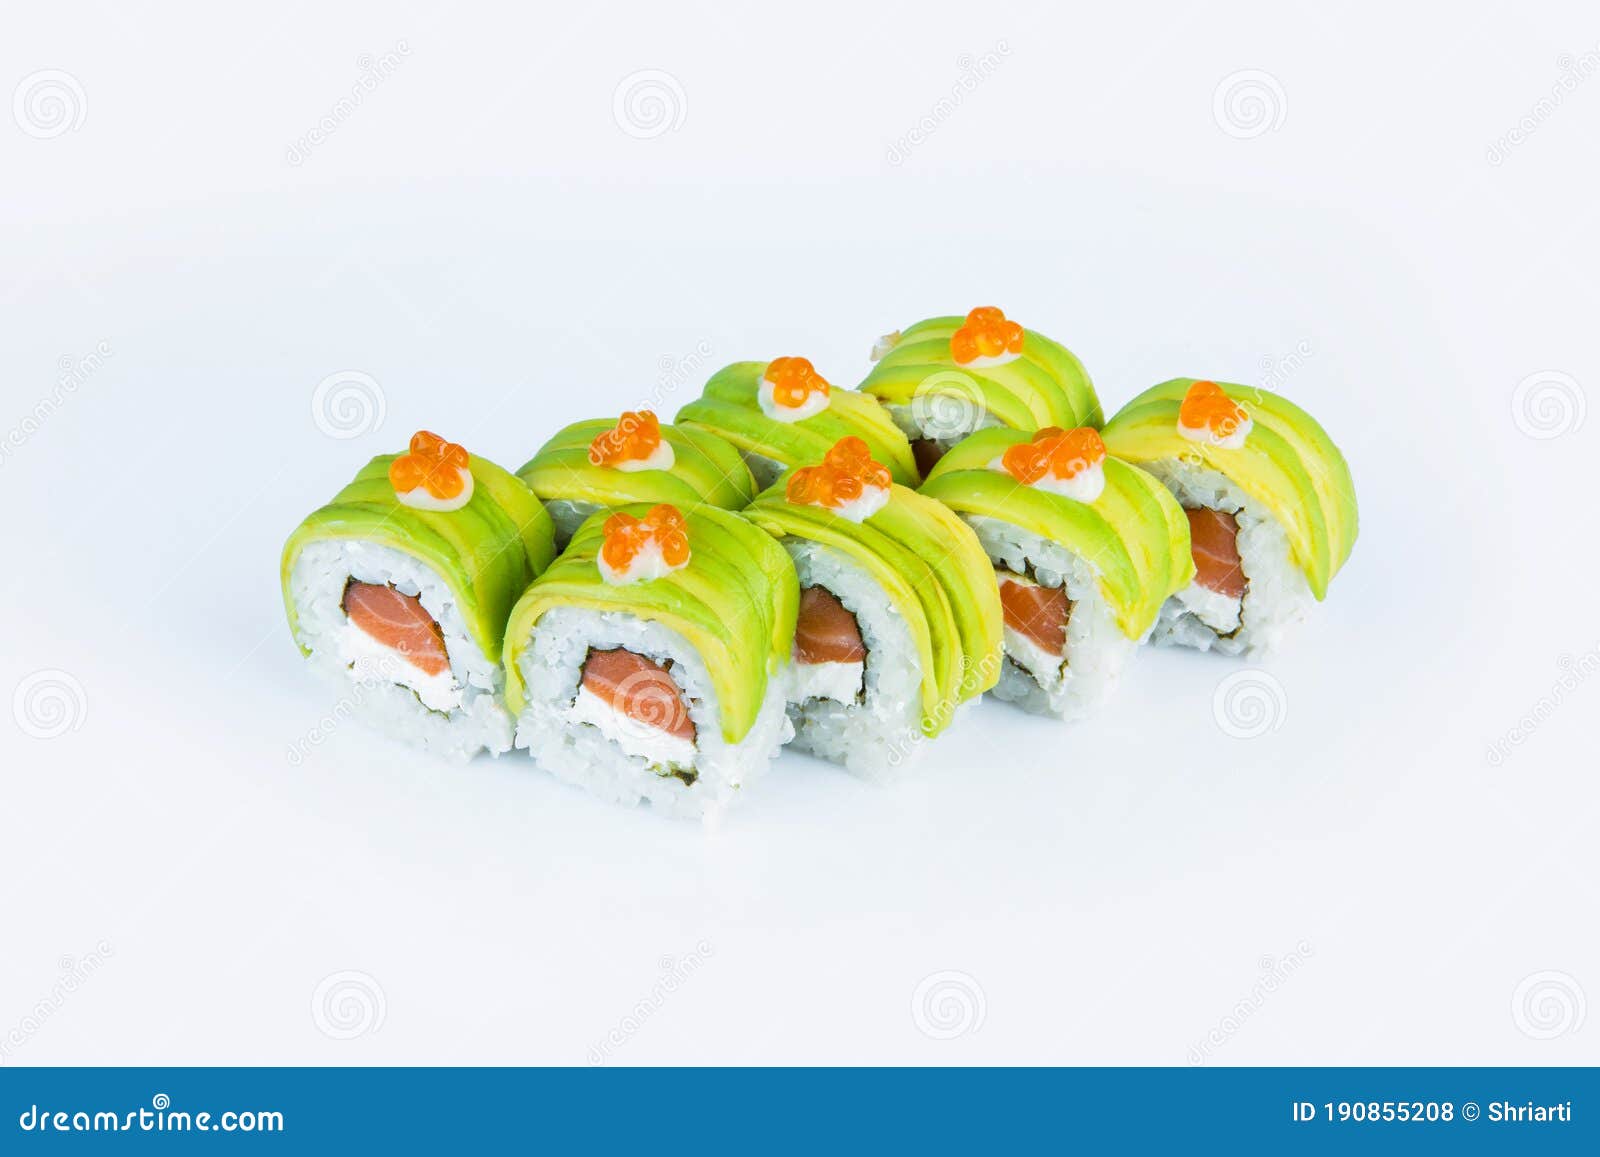 Roll with Avocado Slices and Red Caviar on Top Isolated on Gray Background Stock Photo - Image of fresh, isolation: 190855208